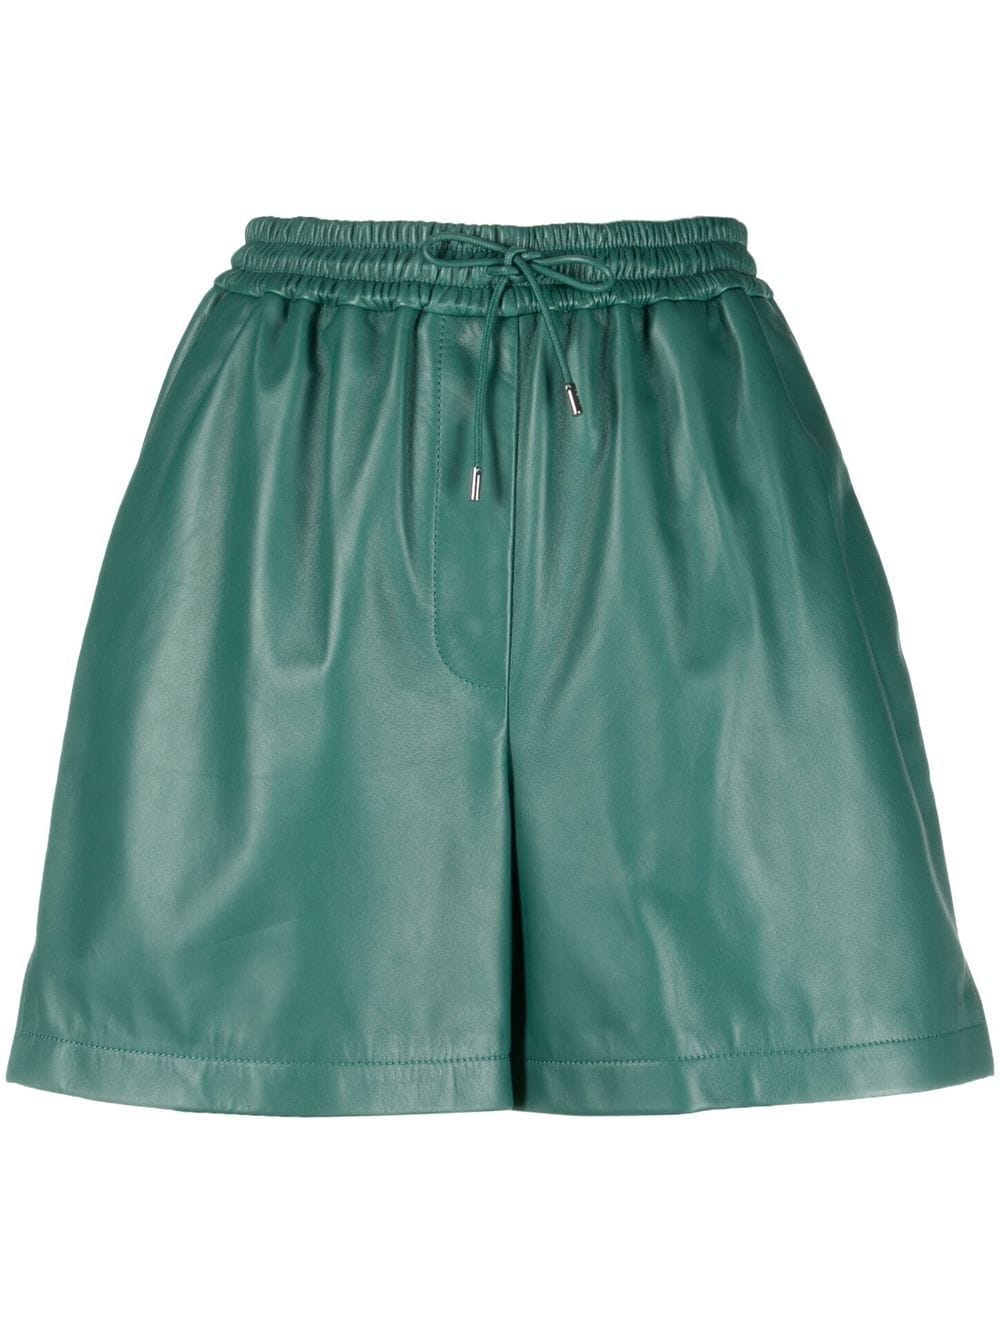 Loewe Leather Shorts In Green